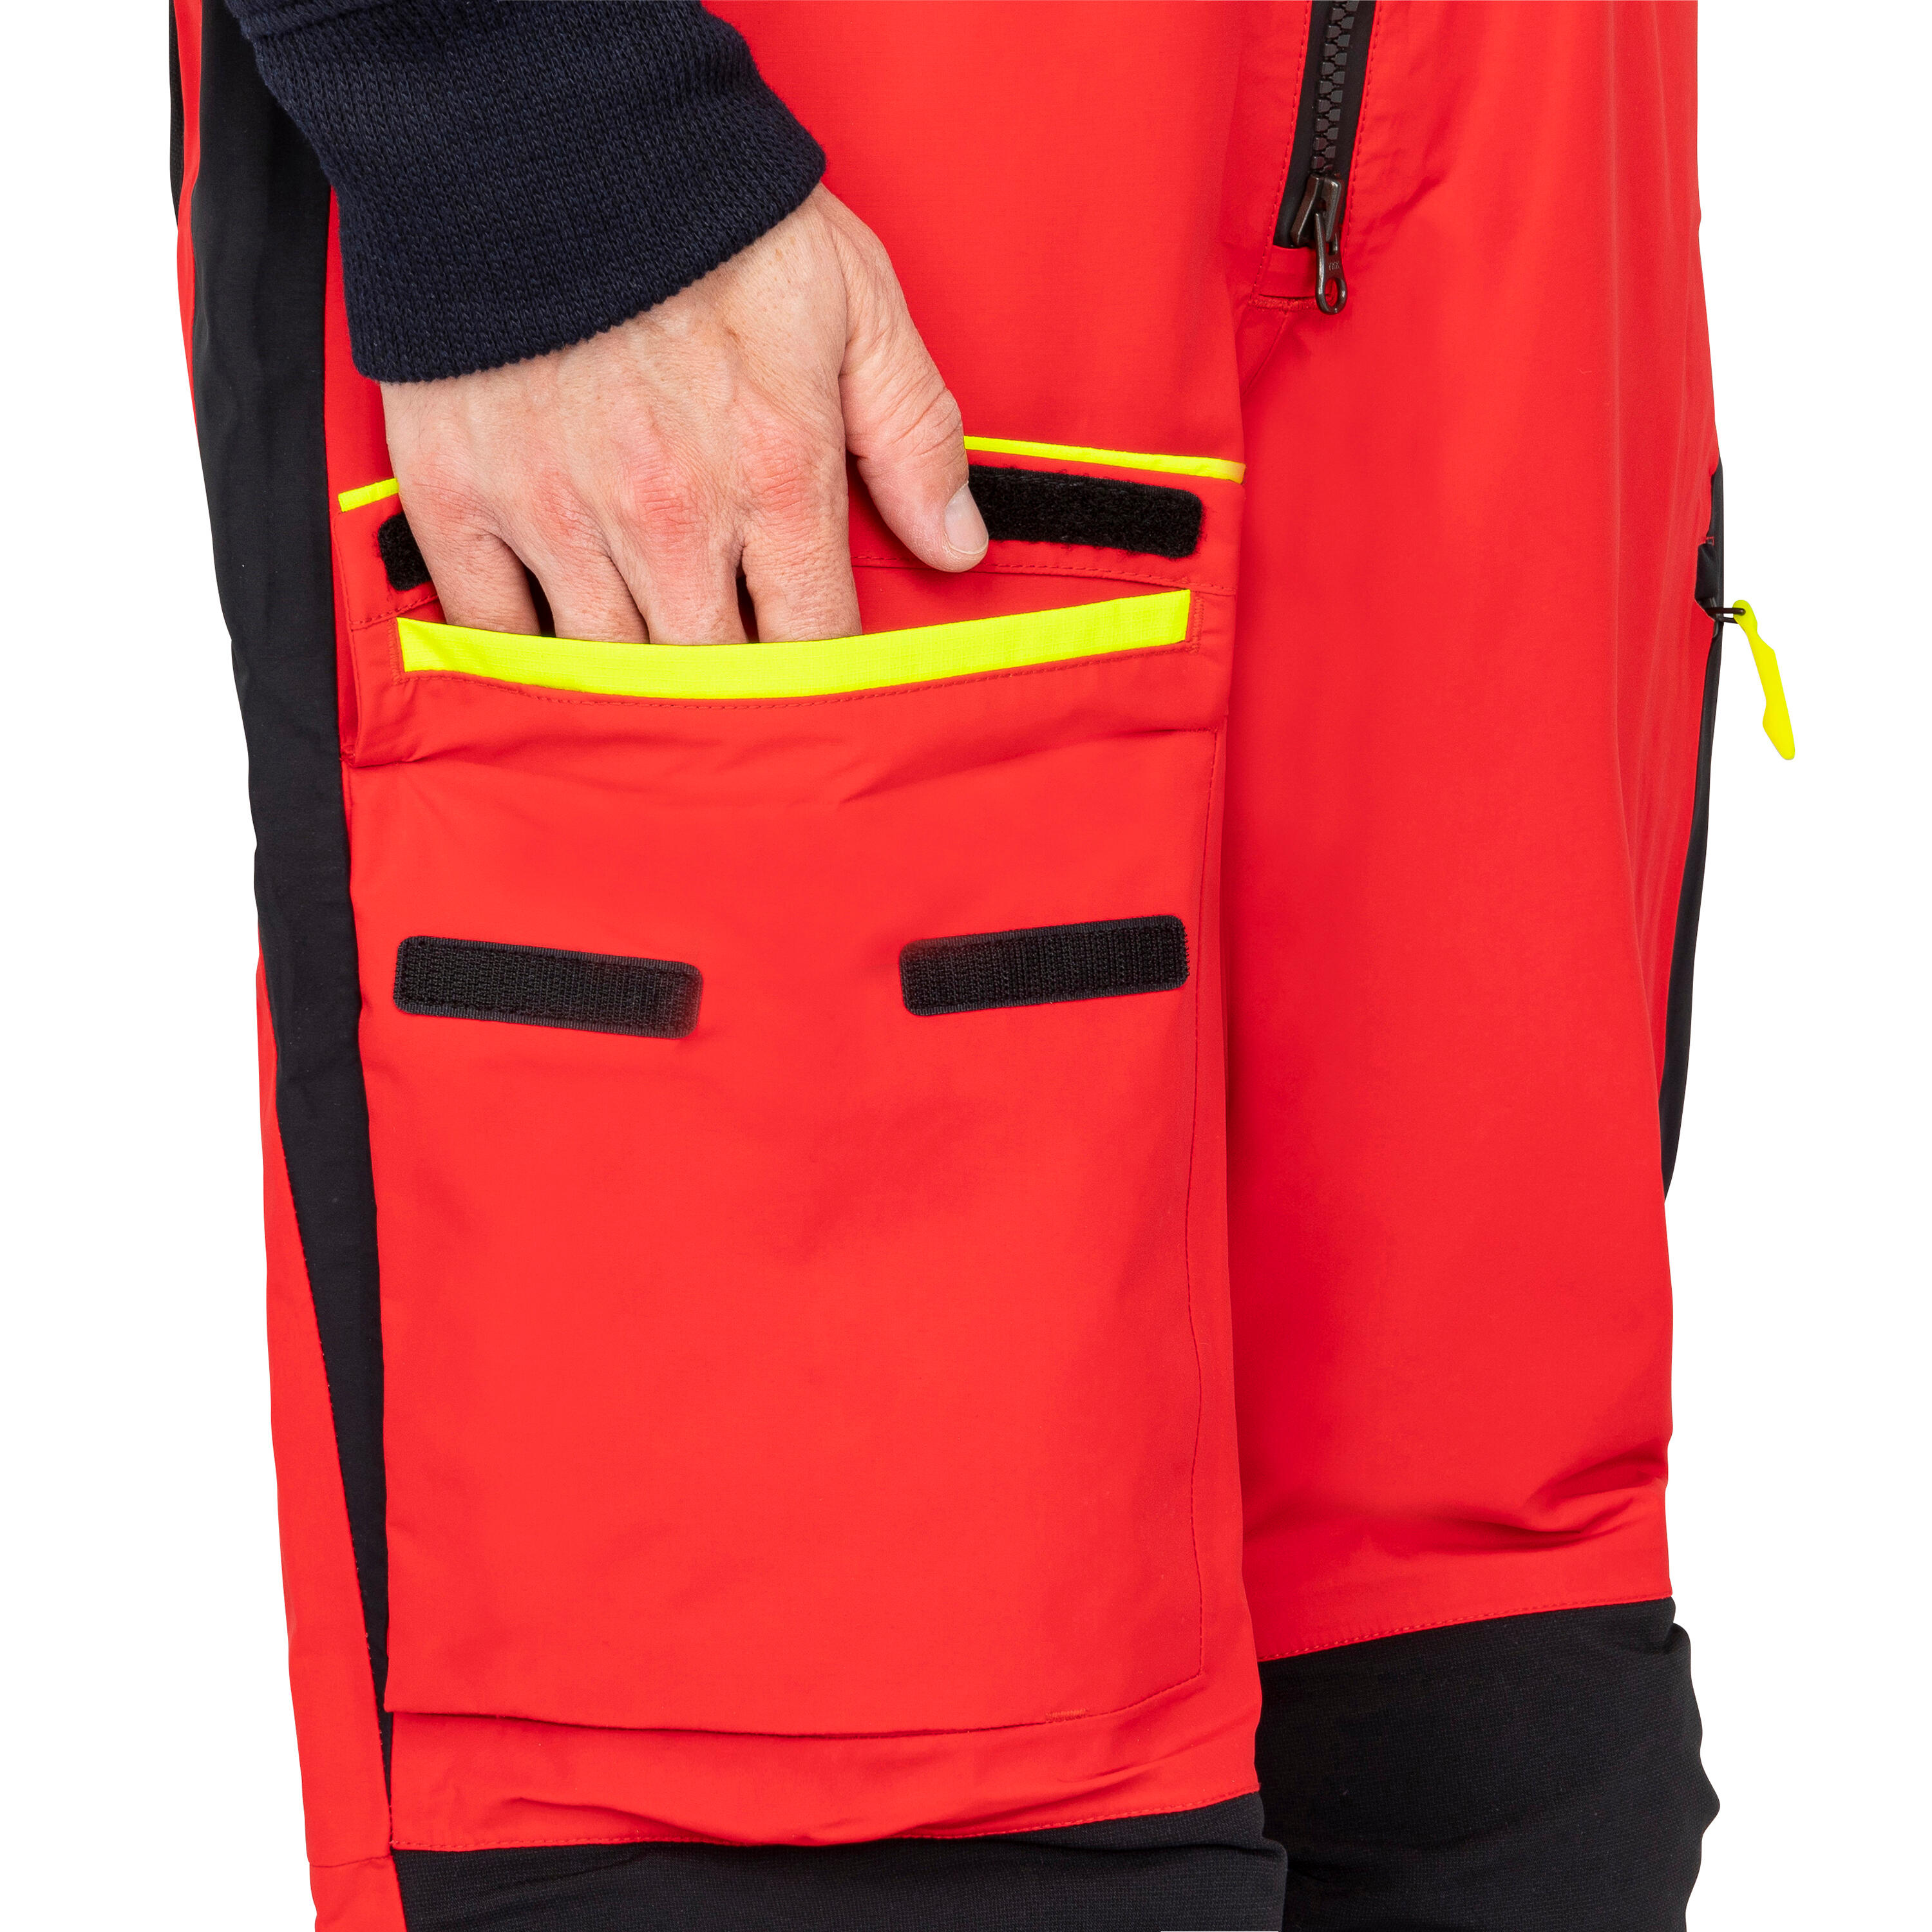 Adult Sailing overalls - Offshore 900 OPEN dropseat red 12/16